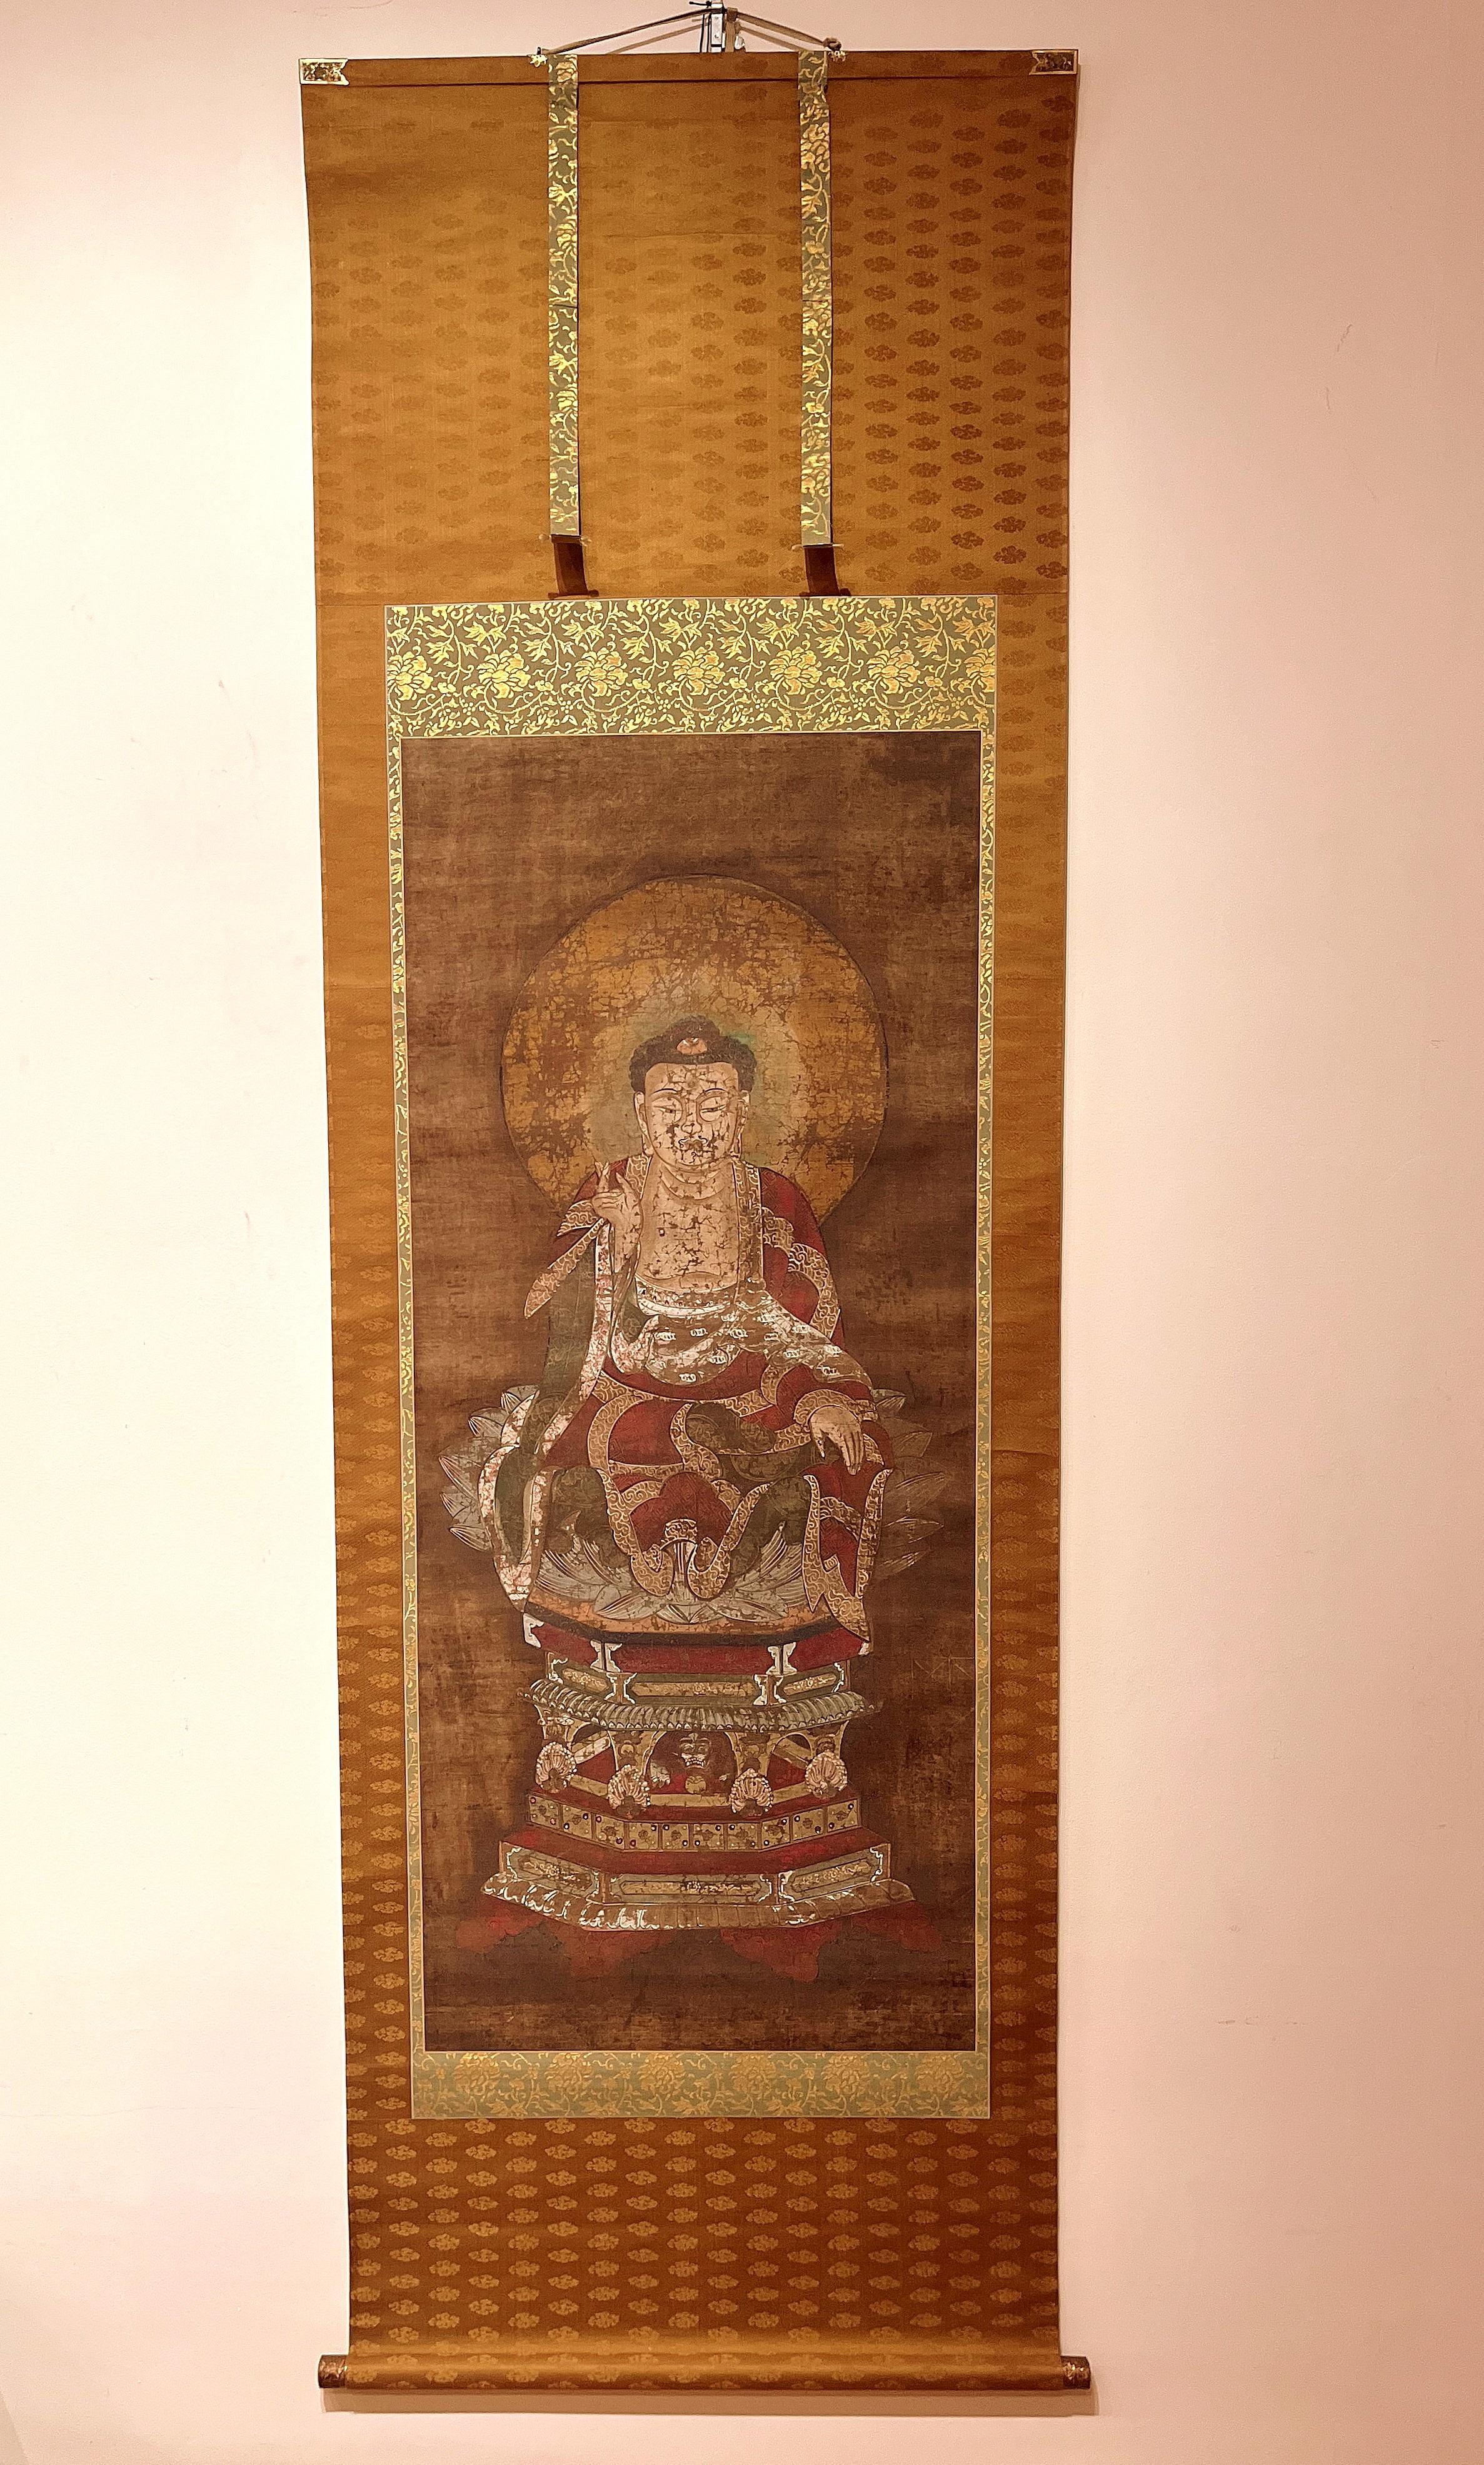 Japanese Buddhist Painting Sitting on Lotus Crown Seat
Ink and color on silk
Overall size :  25.6